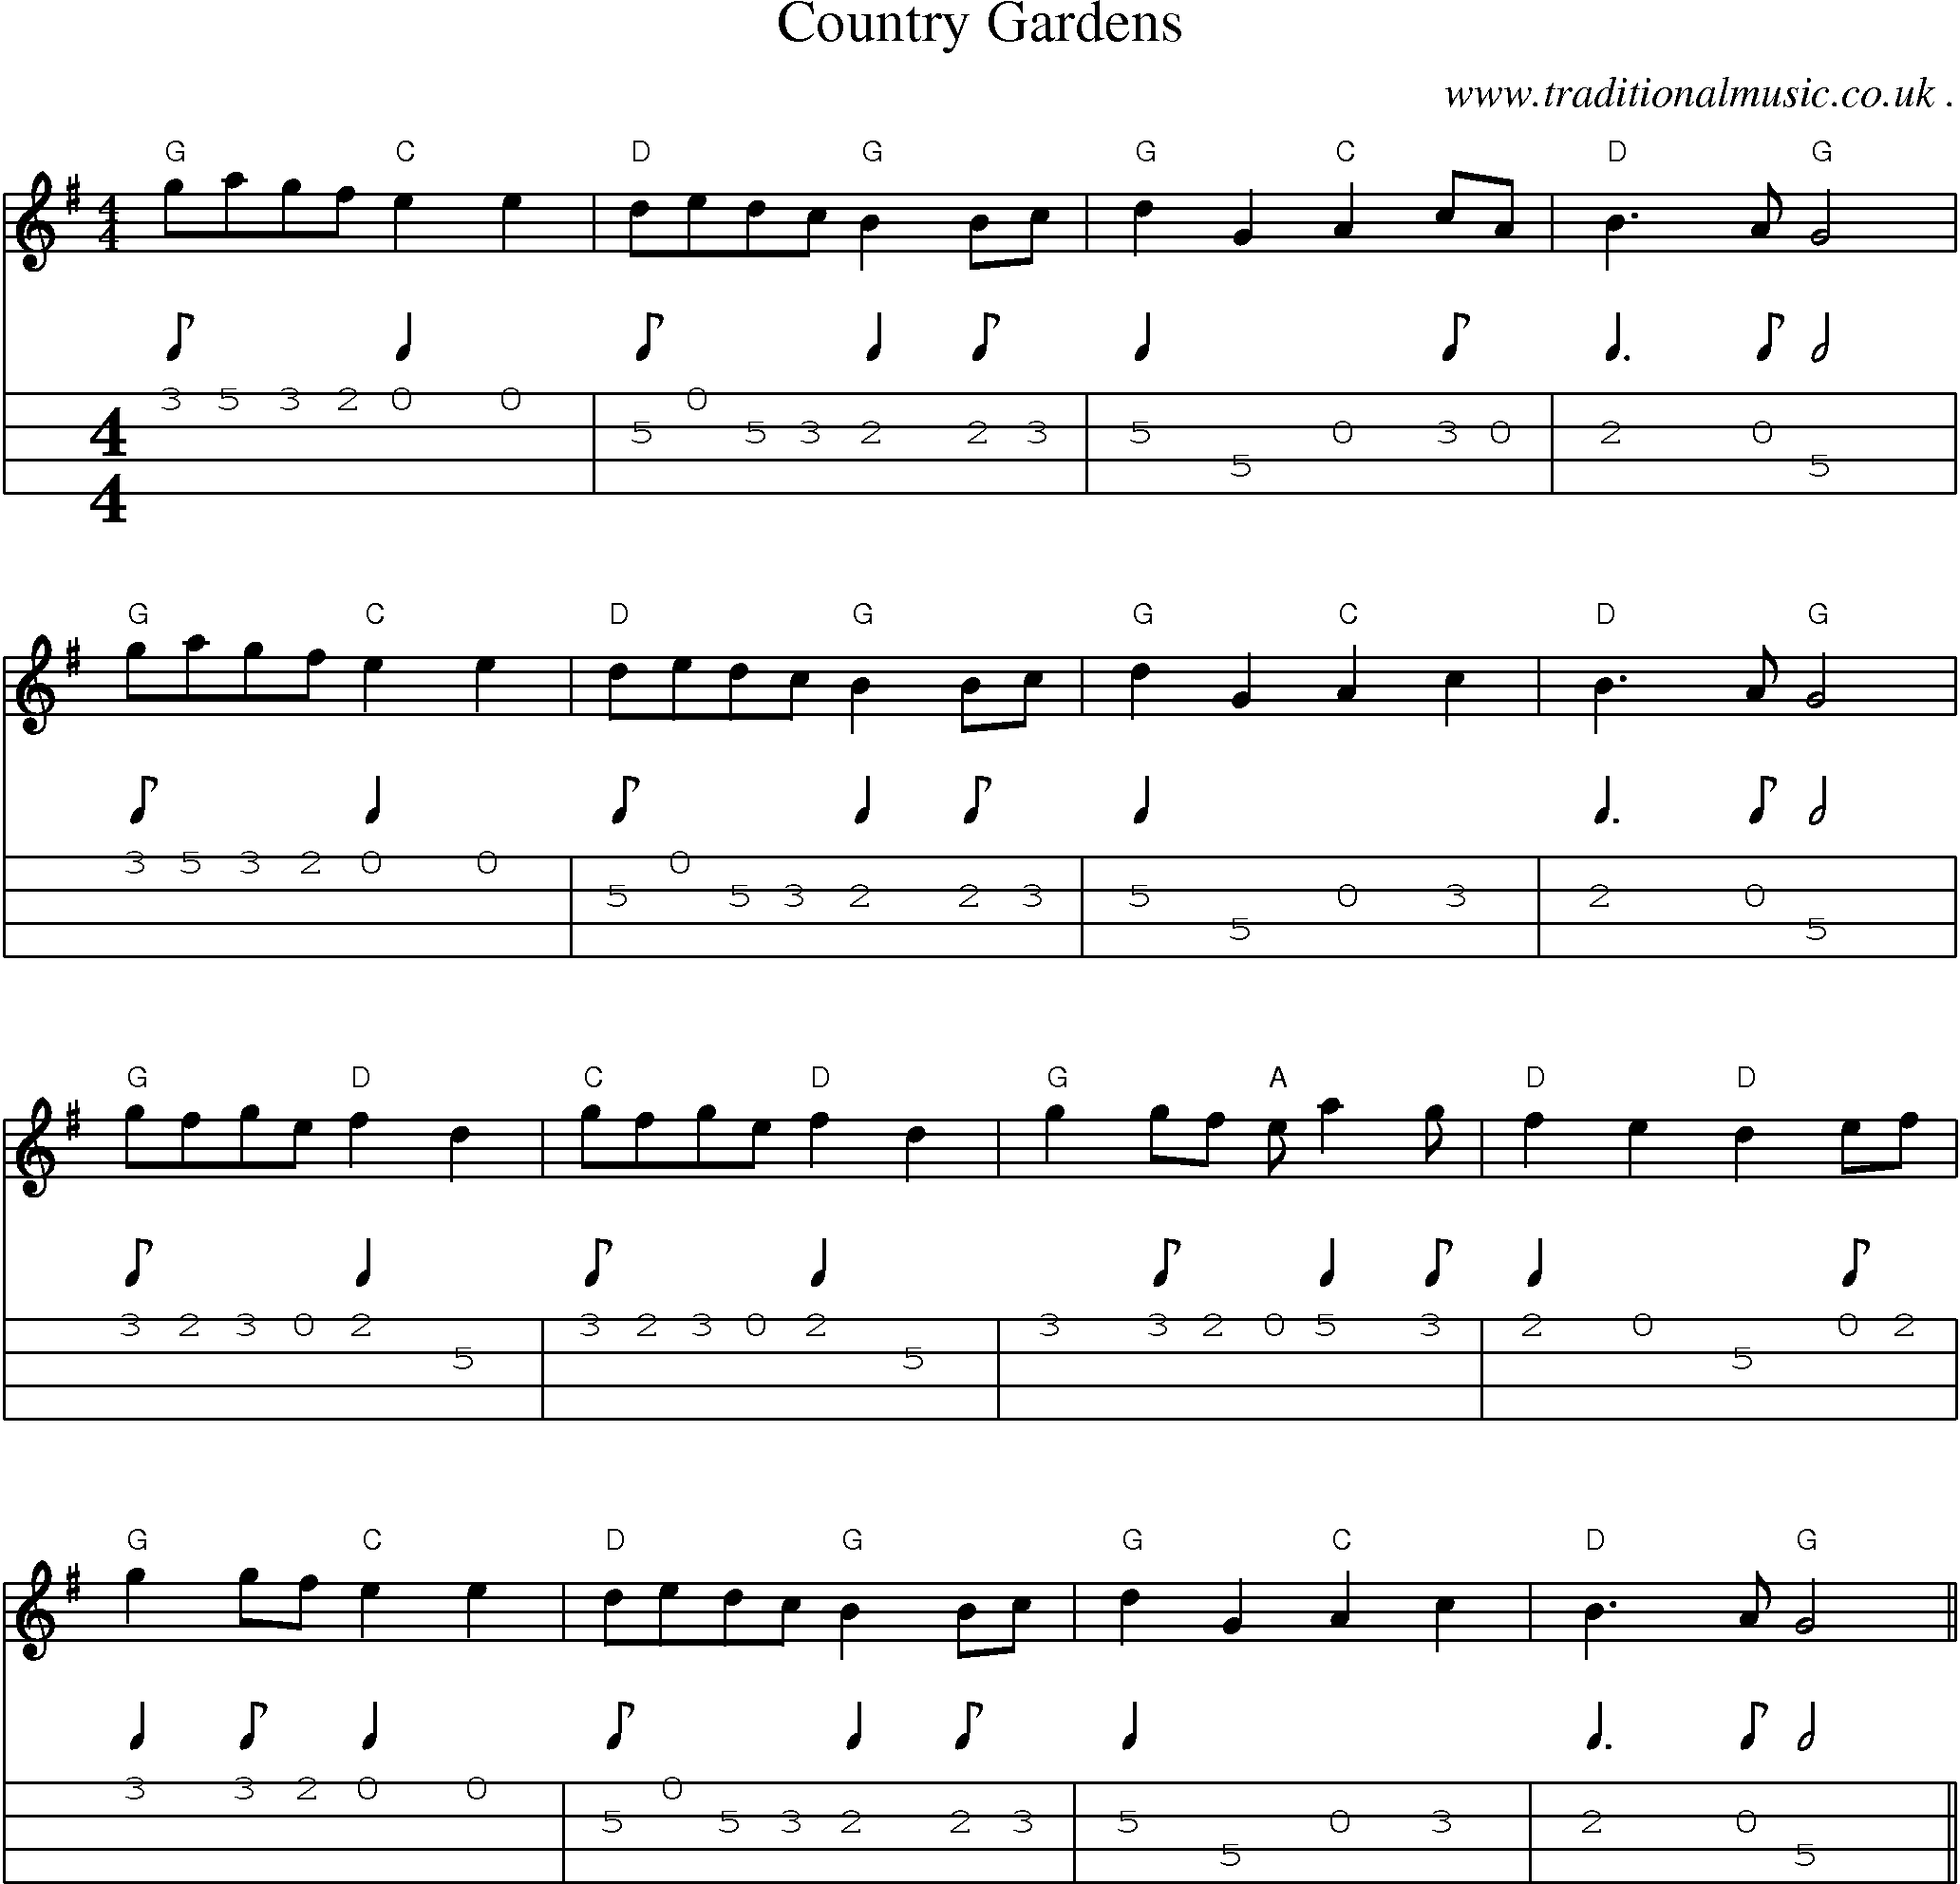 Music Score and Guitar Tabs for Country Gardens